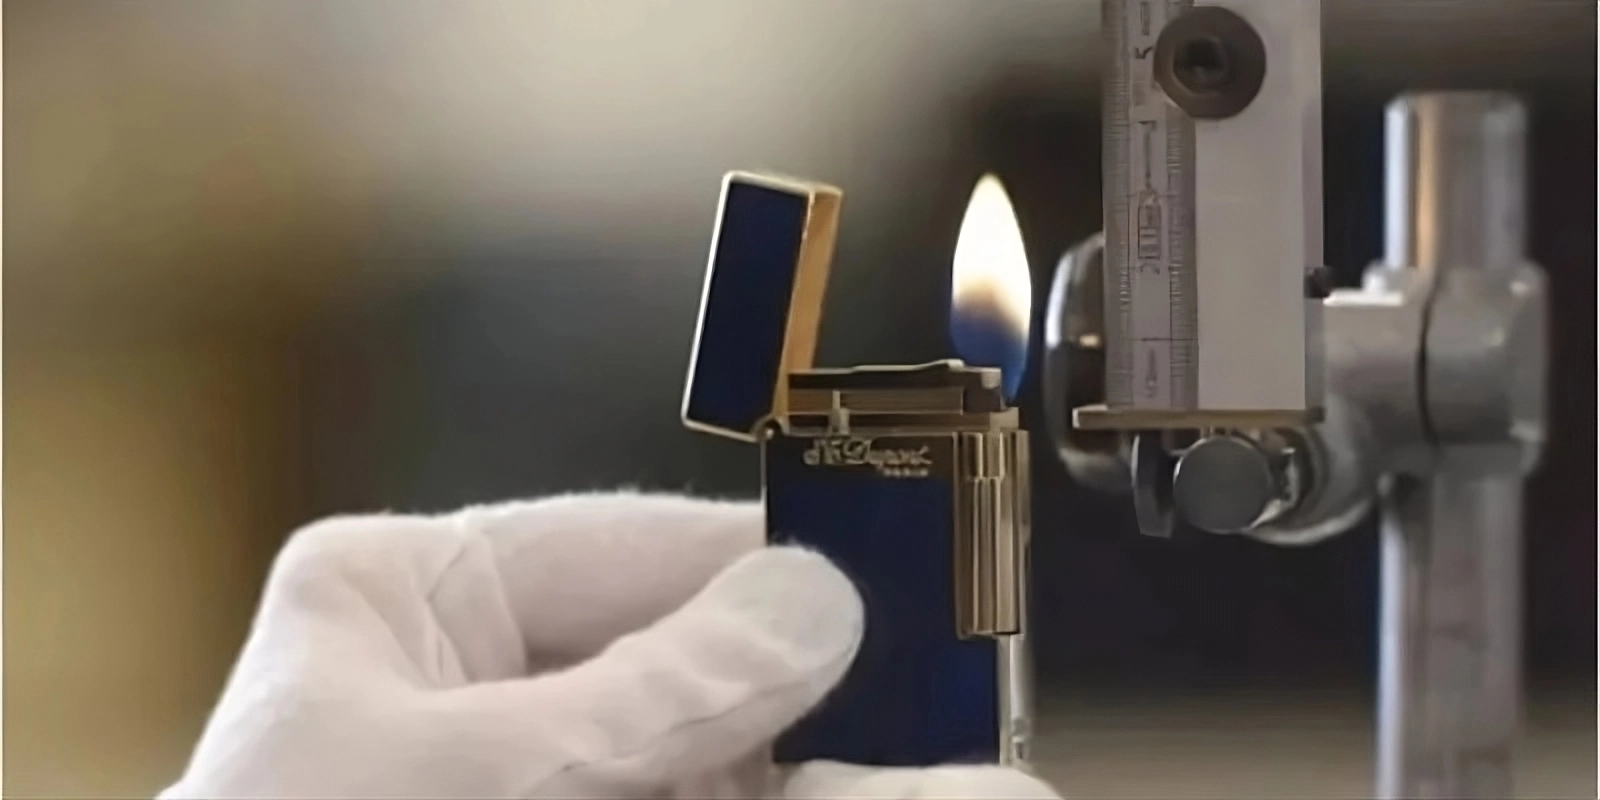 Flame Types and Adjustment Mechanisms in S.T. Dupont Luxury Lighters: A Technical Overview